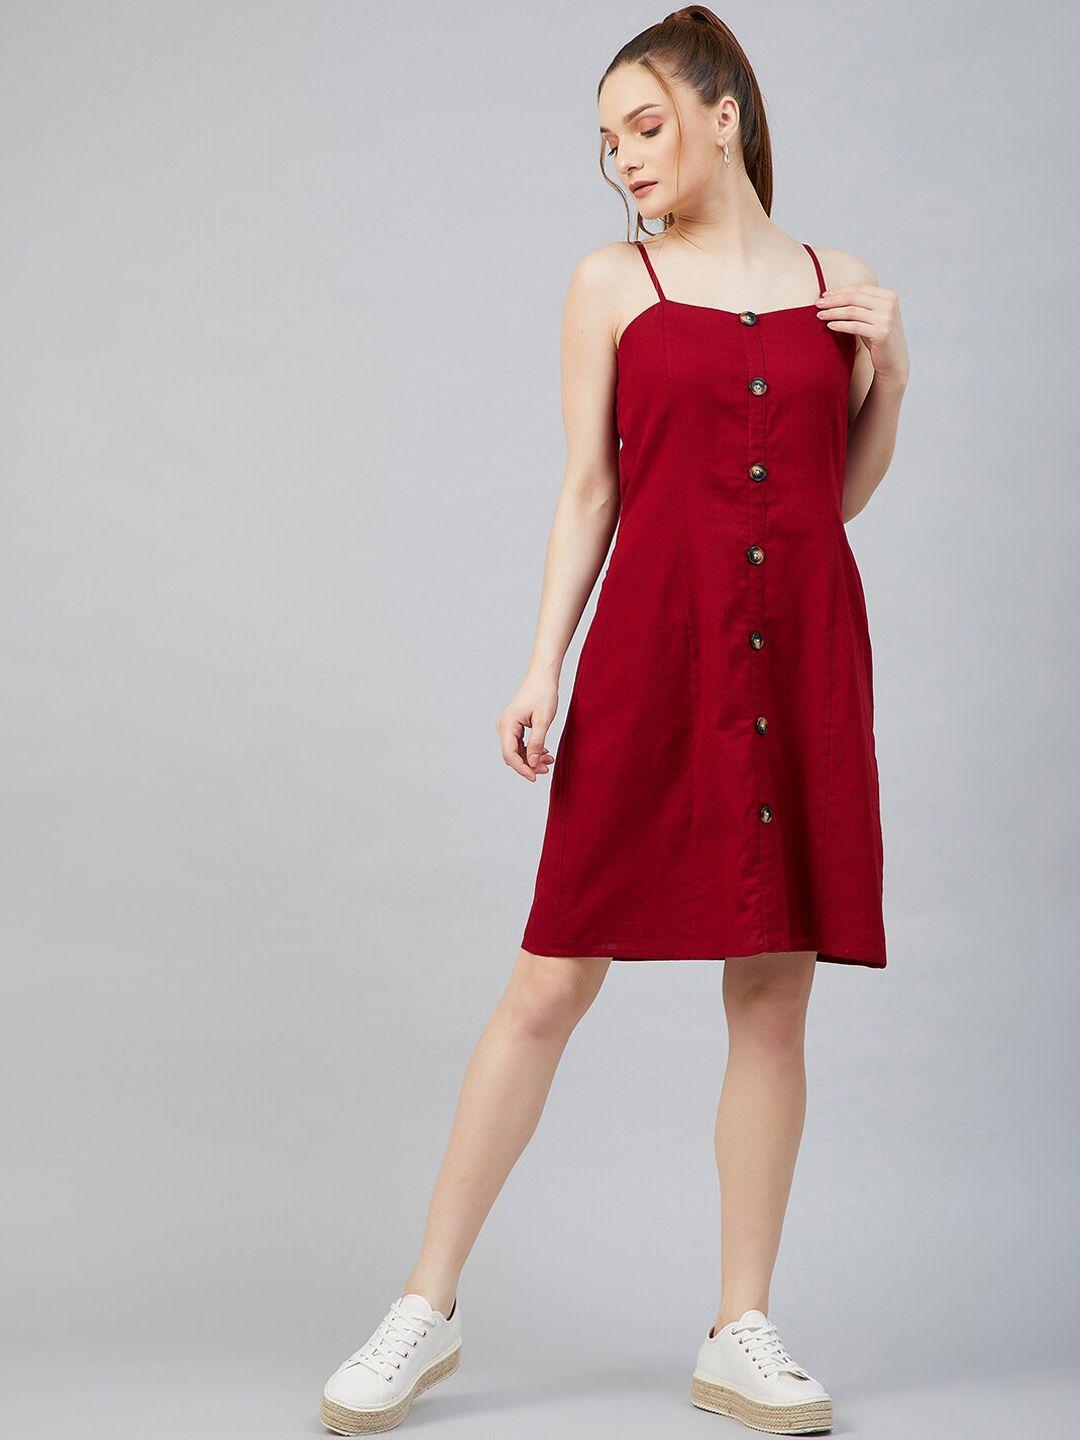 Marie Claire Women Red Pinafore Dress